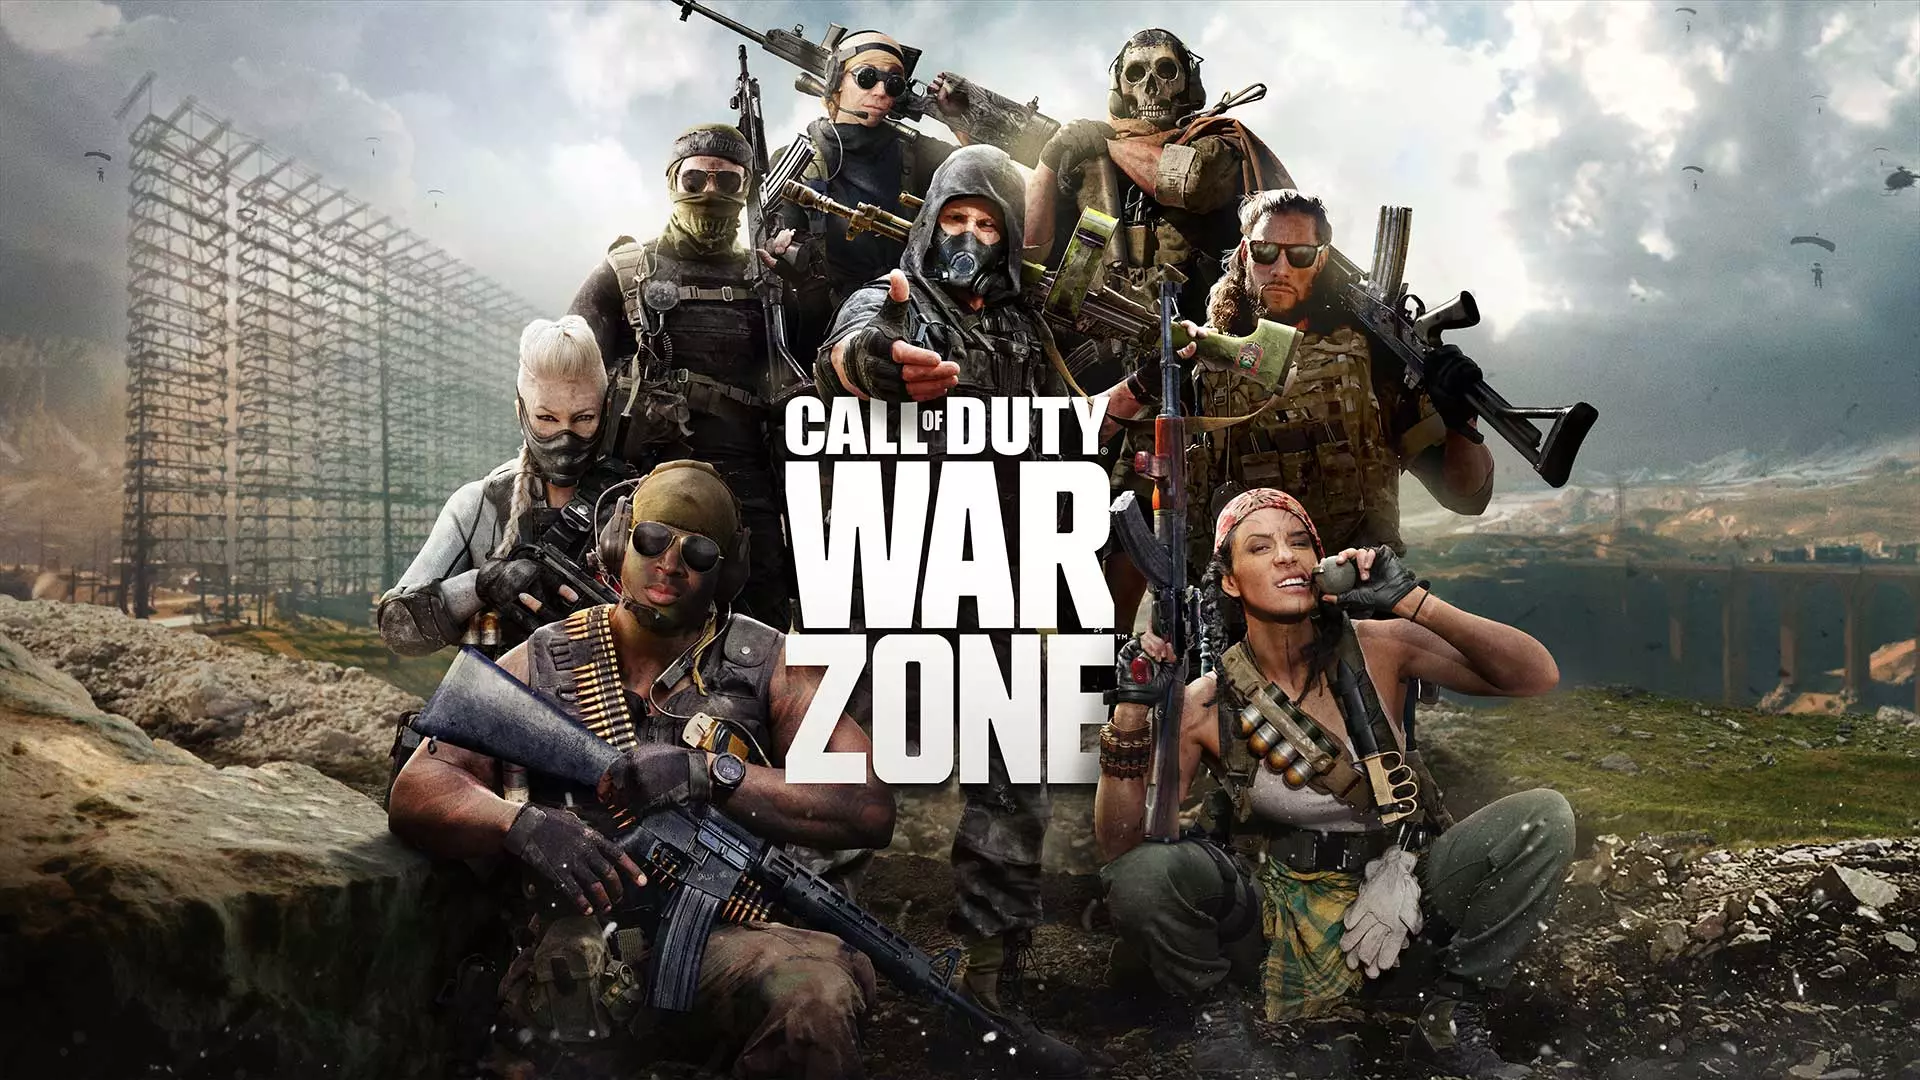 The Best Class for the Call of Duty Warzone EM2